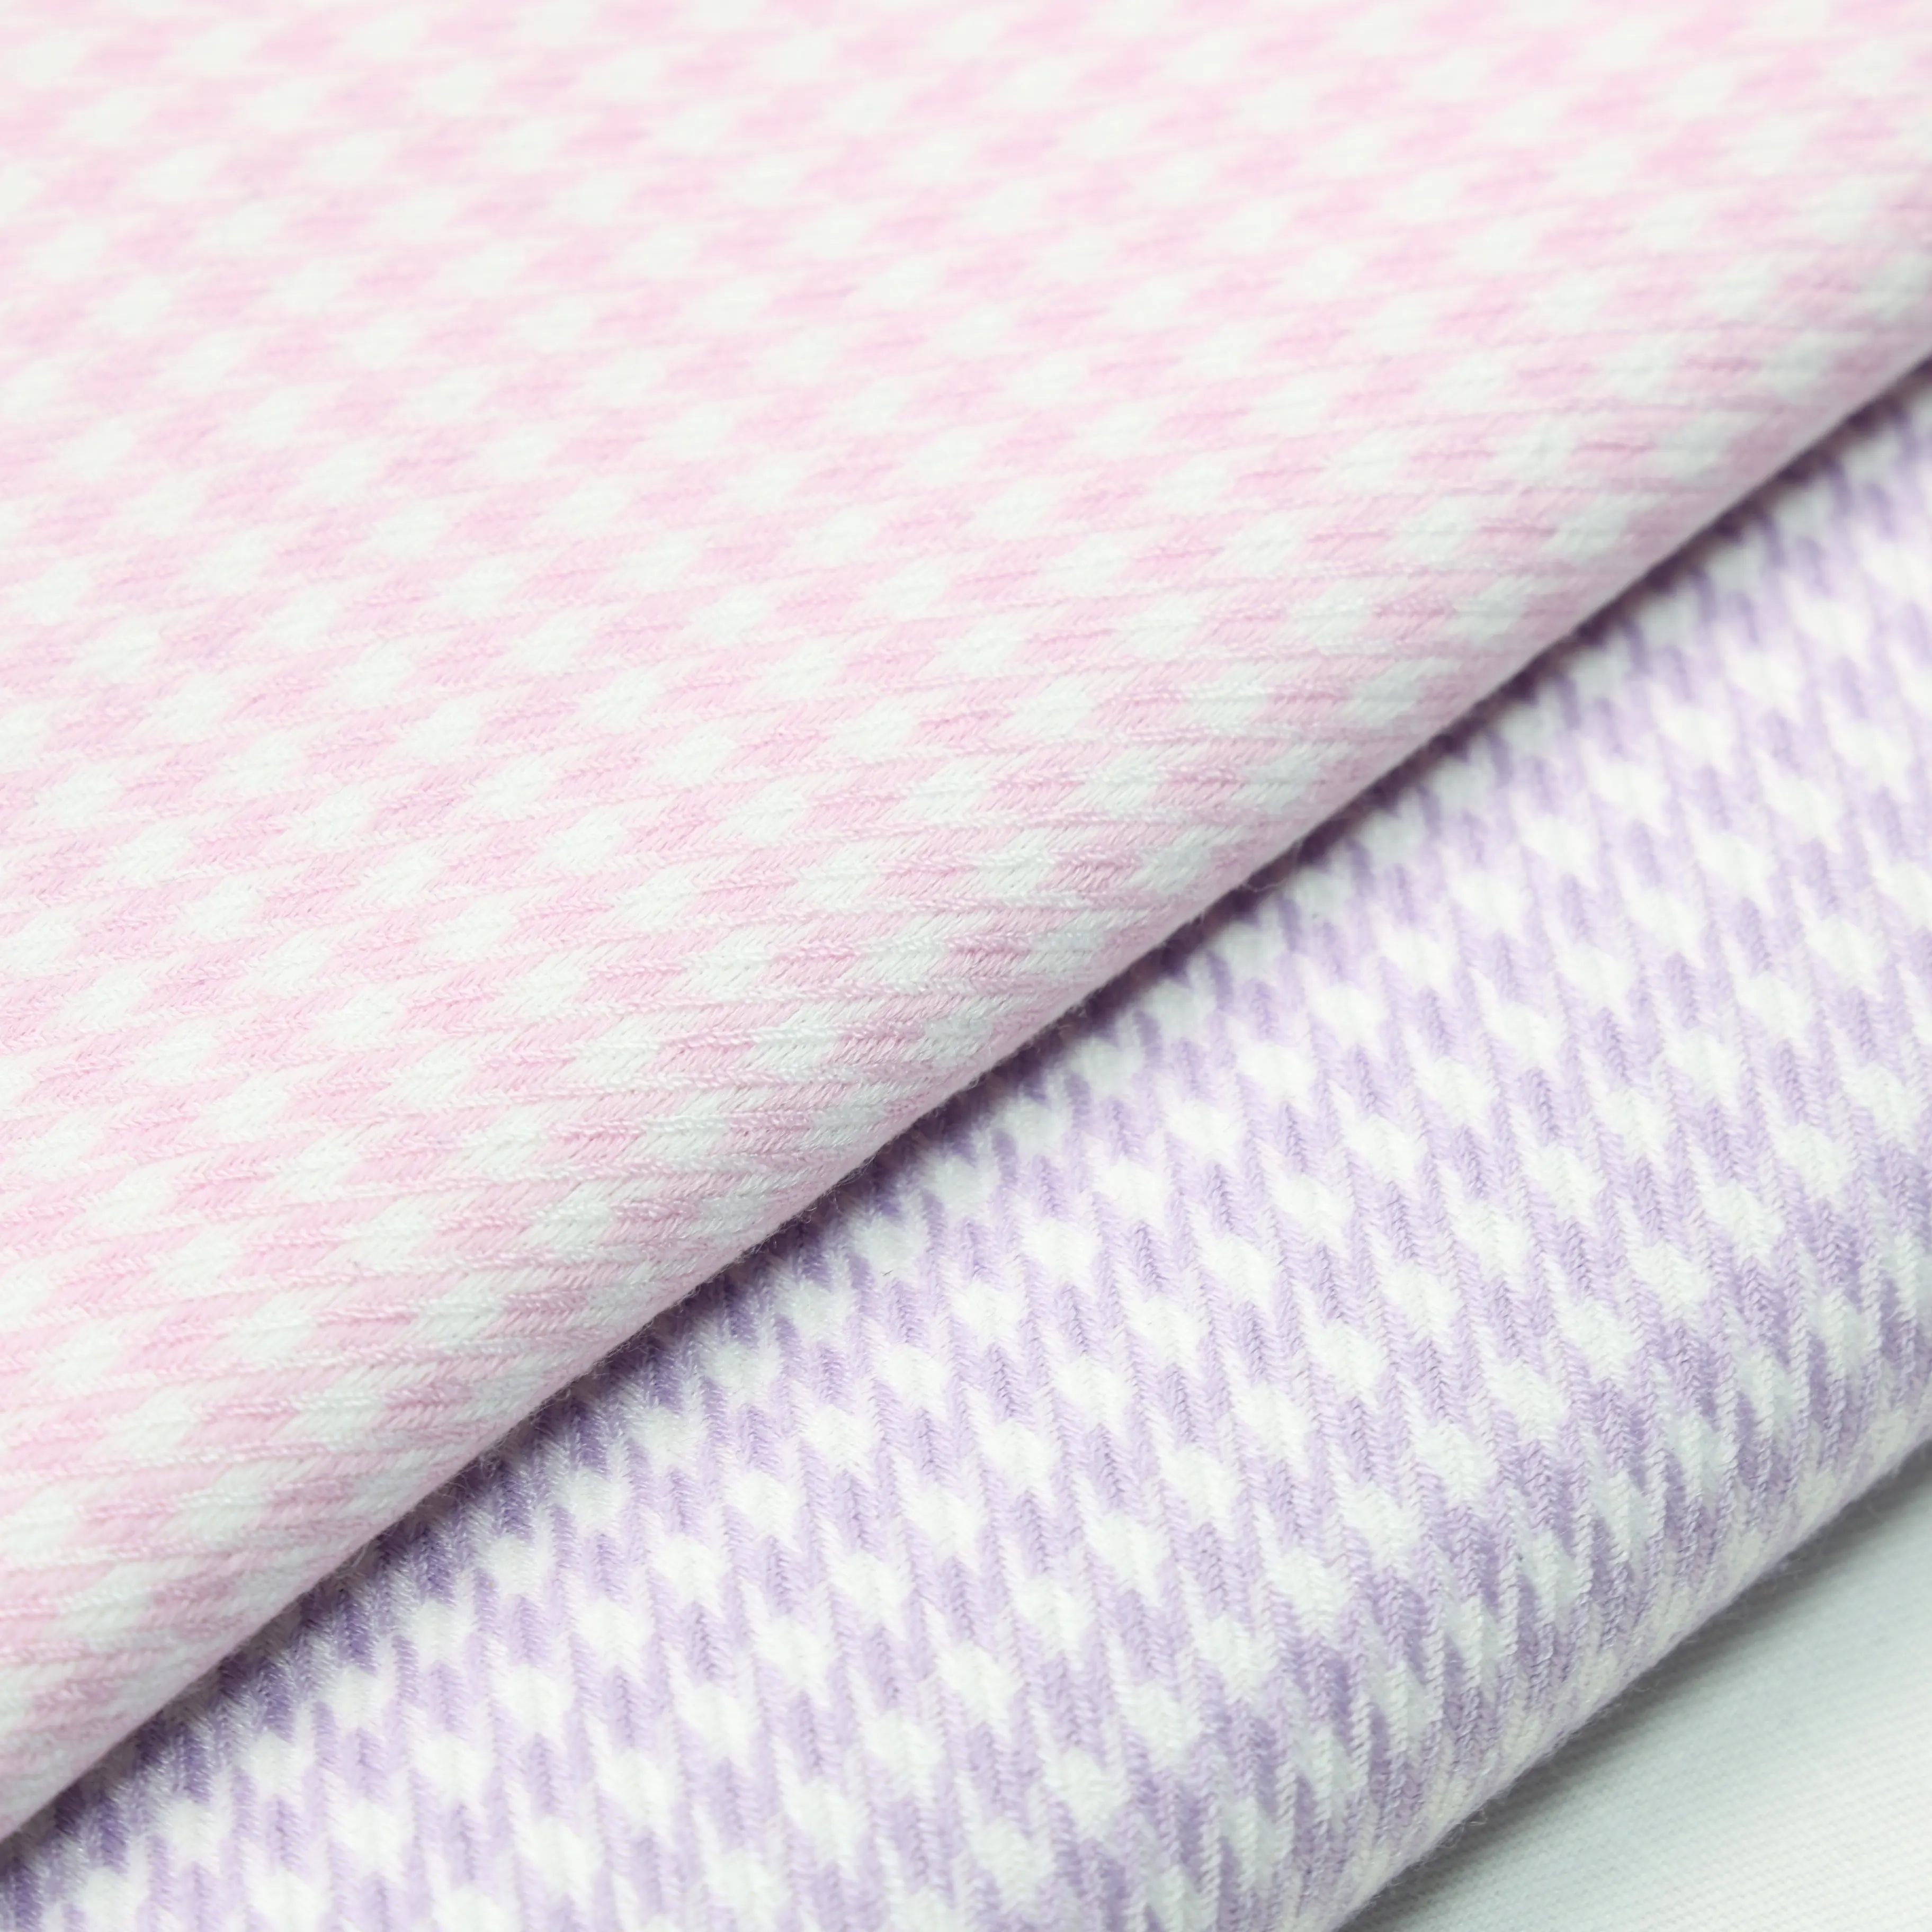 China Textile Classic Design Polyester Viscose Spandex Yarn Dyed Woven Check Fabric for Shirts